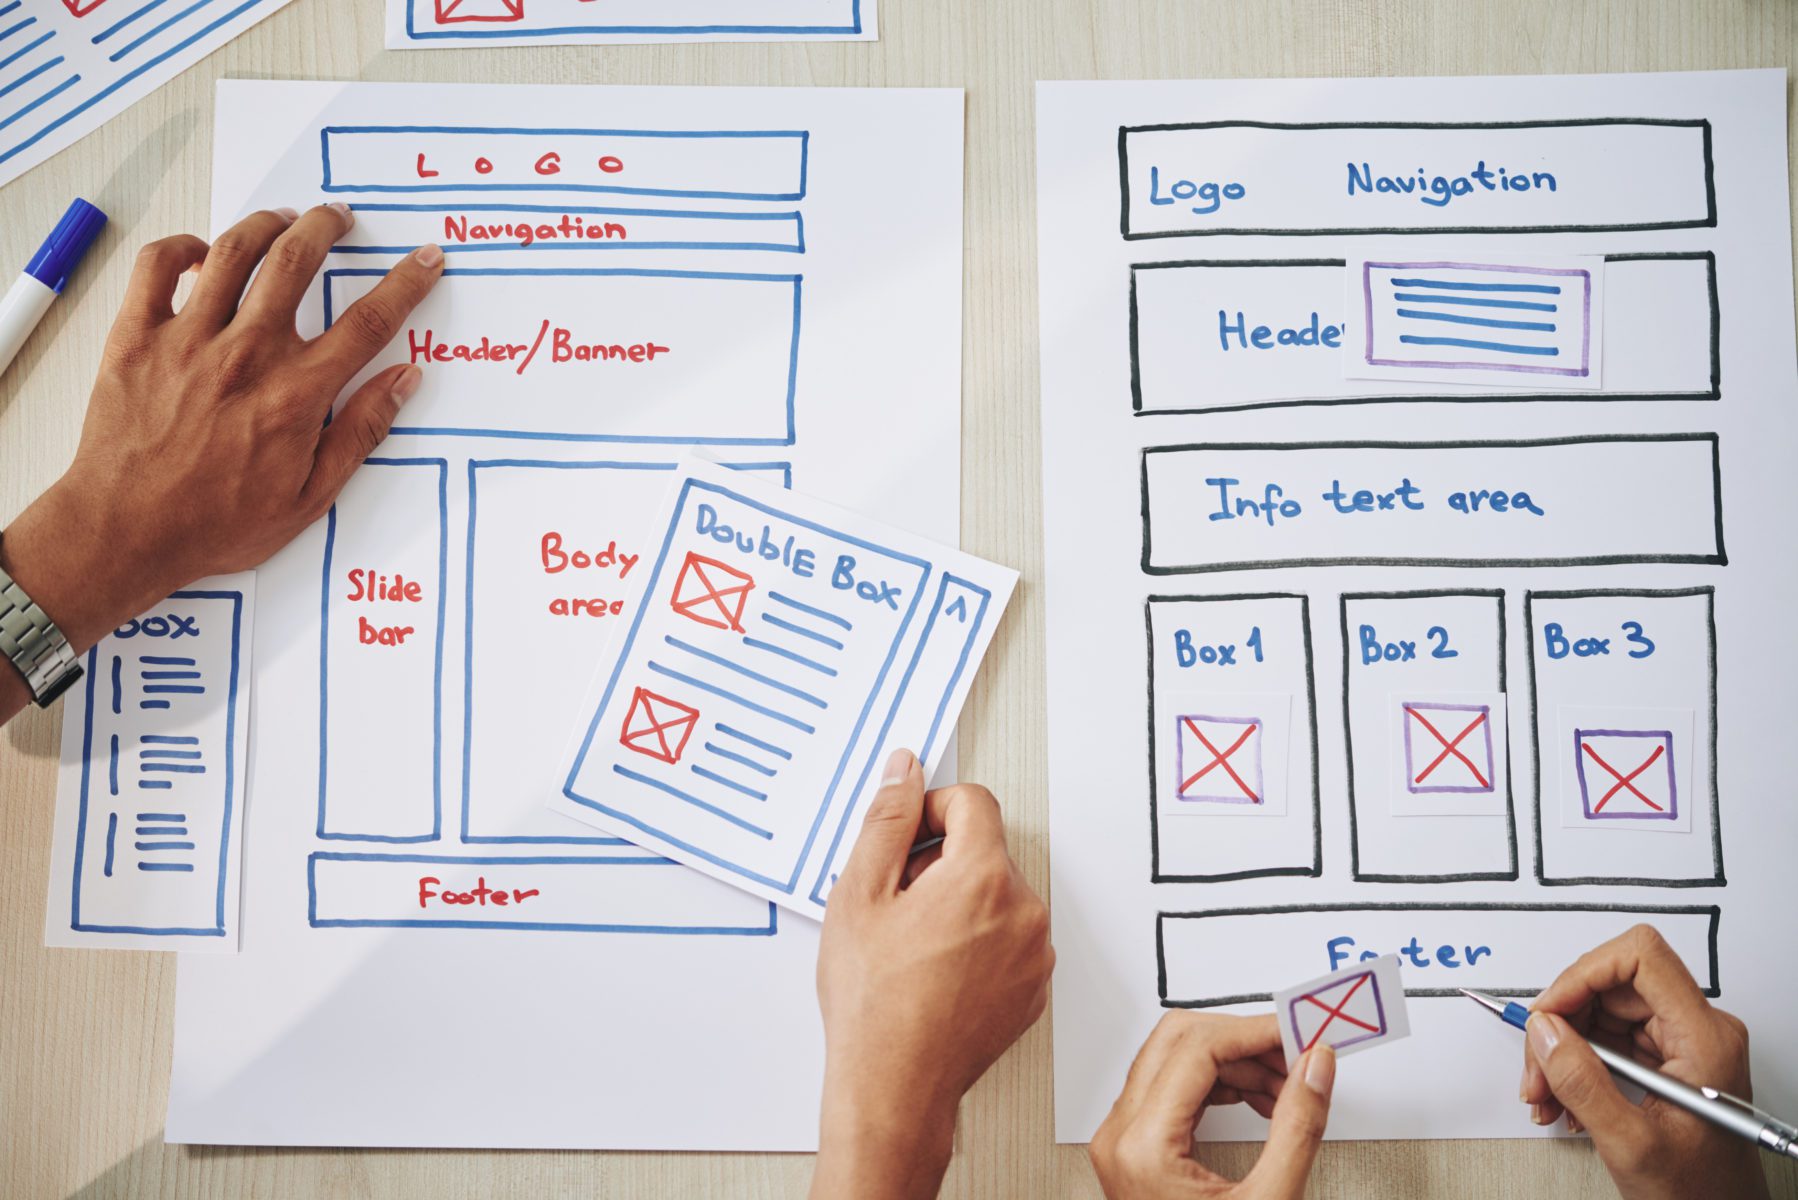 Considerations When Designing a Landing Page